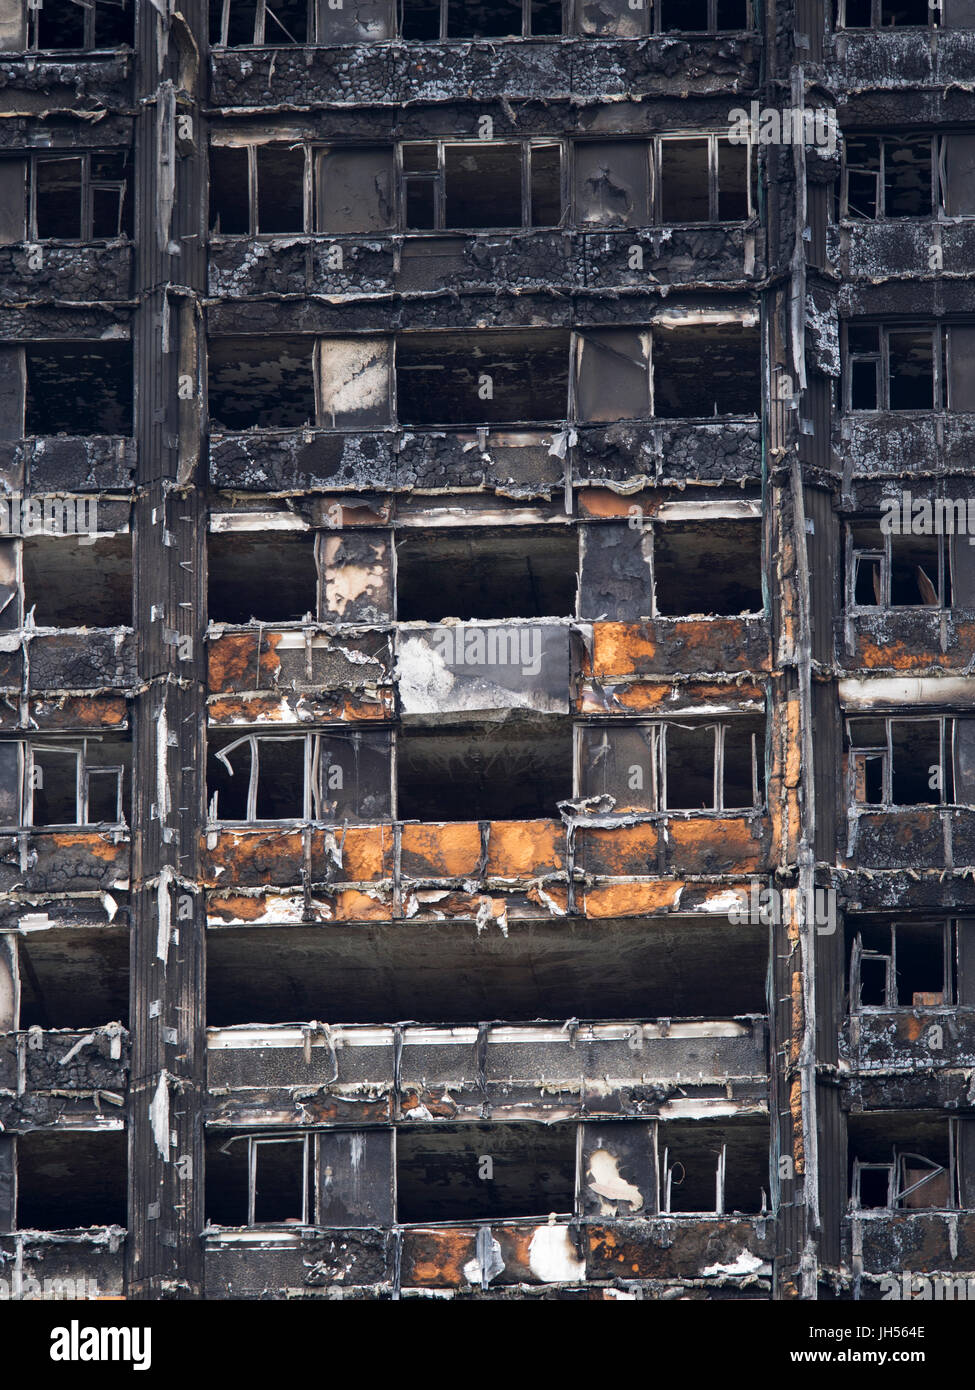 London, UK - Jul 4, 2017: Close up view of the Grenfell Tower block in which at least 80 people are thought to have died following a fire. Stock Photo